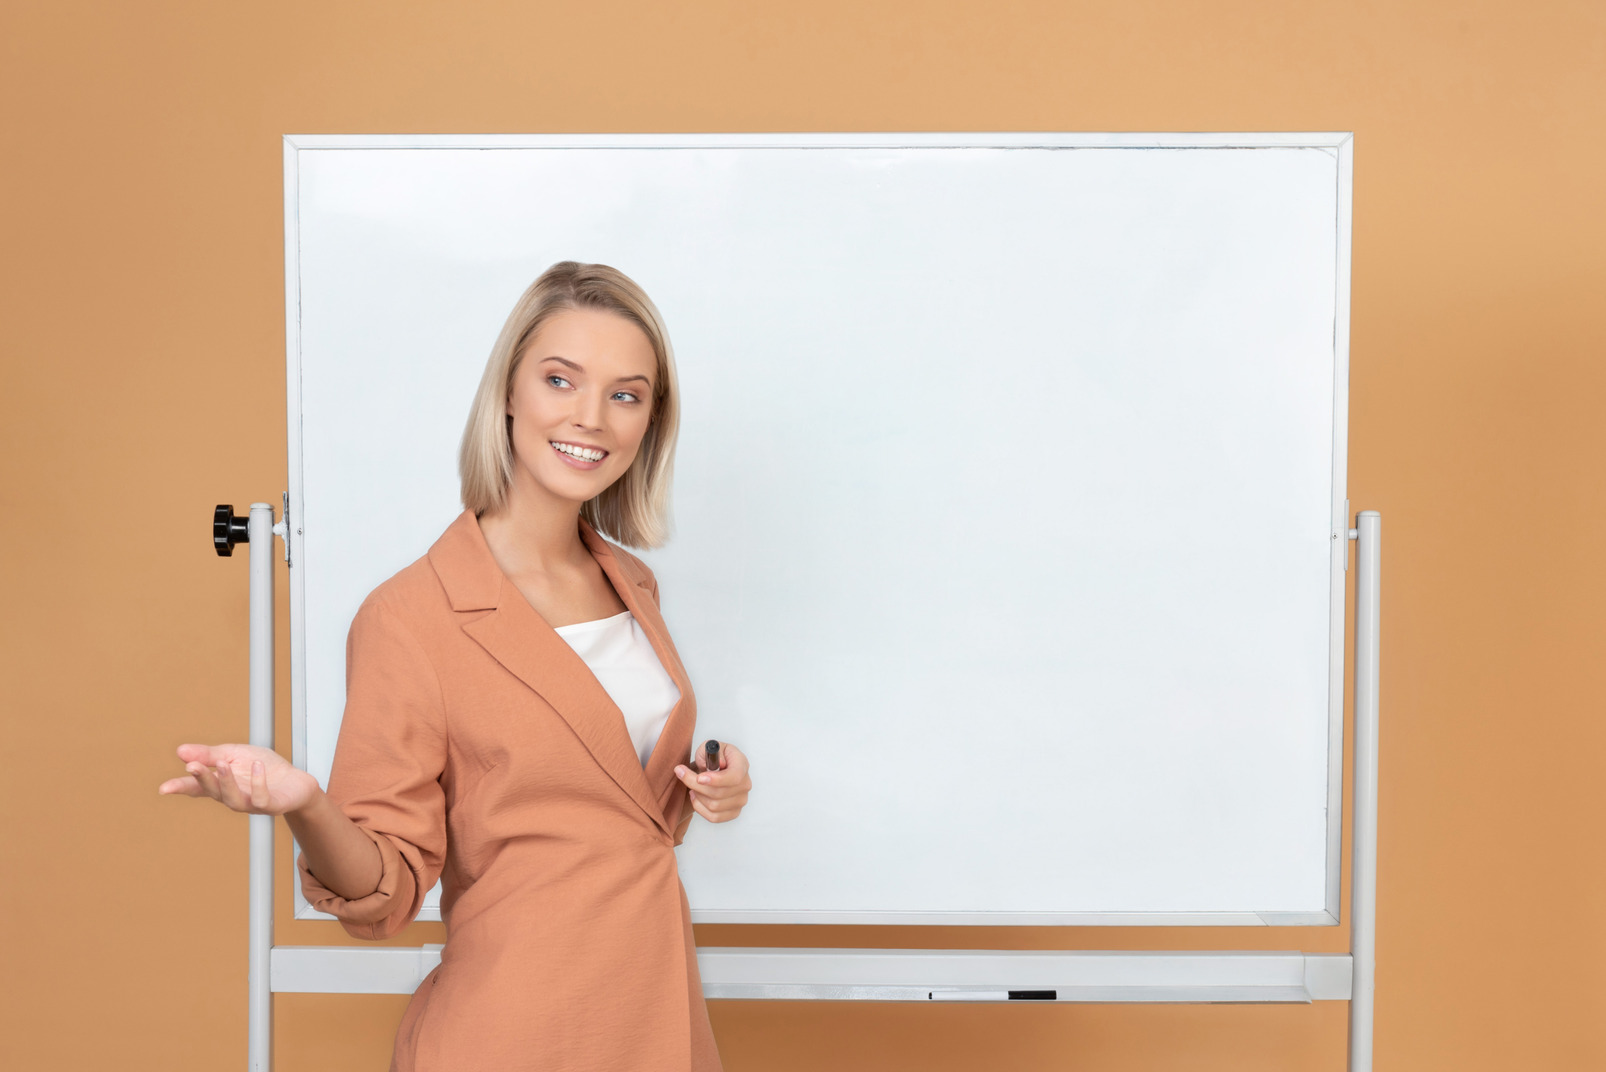 Attractive young woman explaining something near the whiteboard